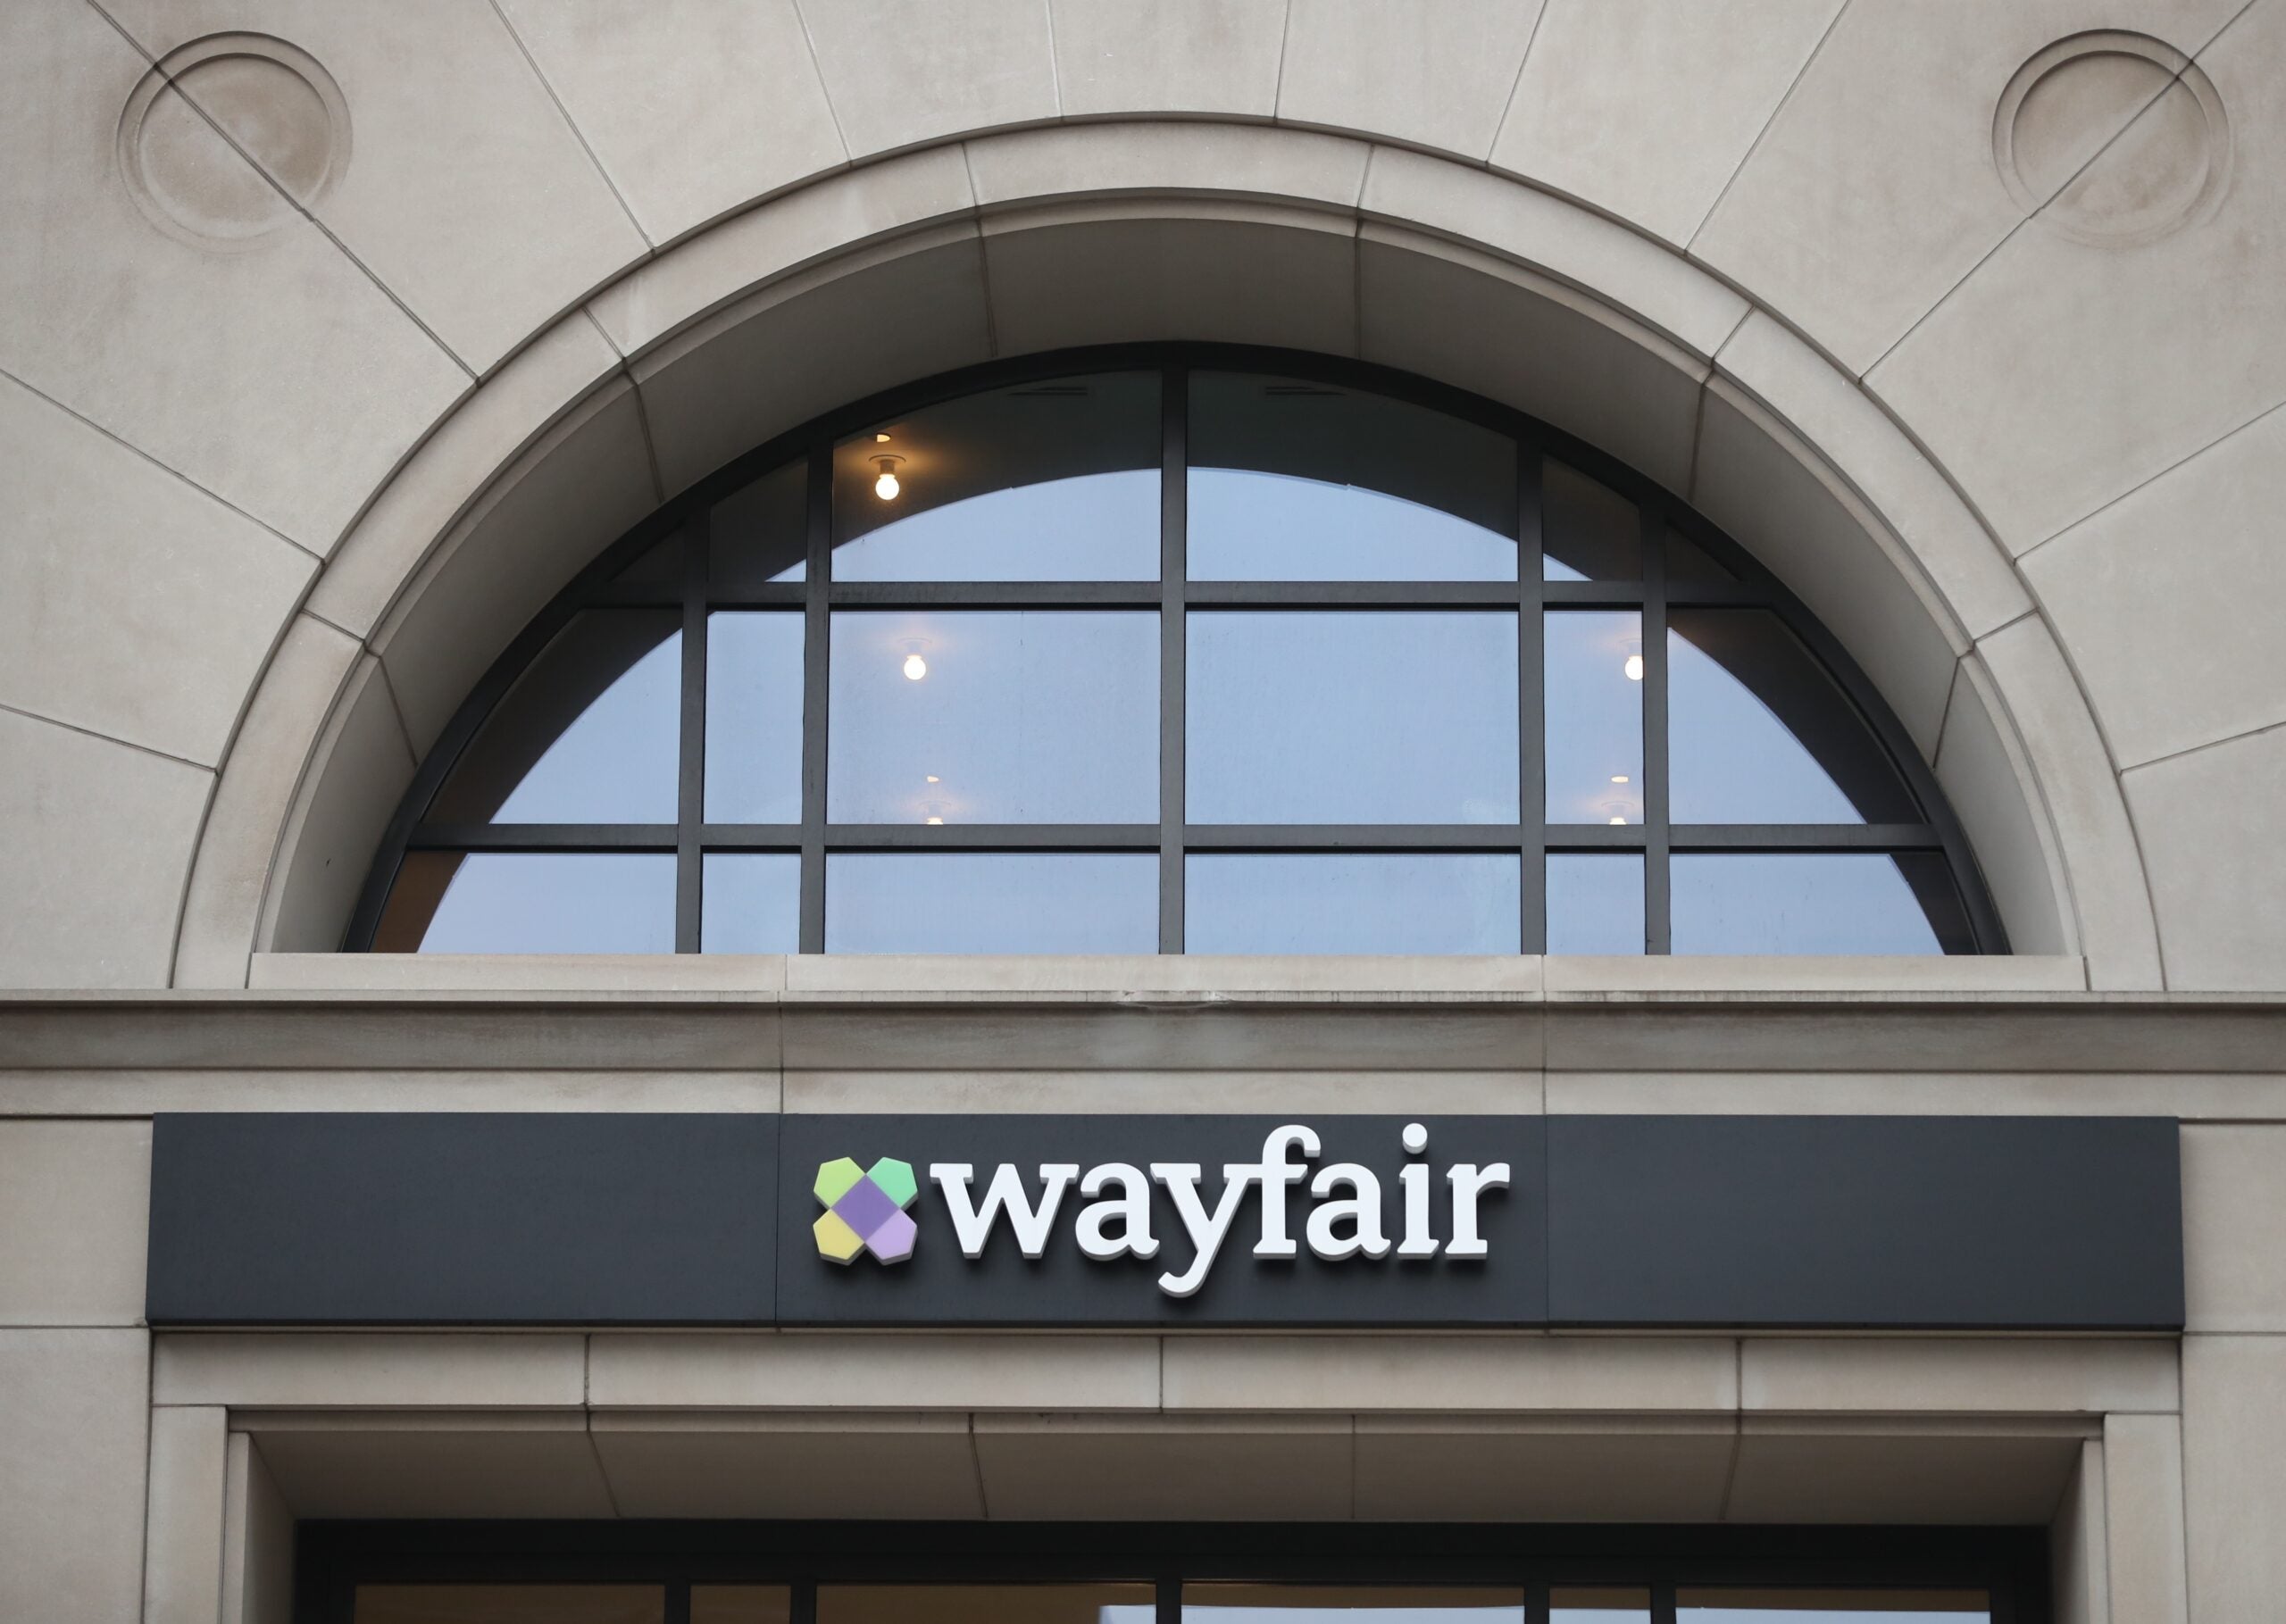 Here's what led to the Wayfair layoffs